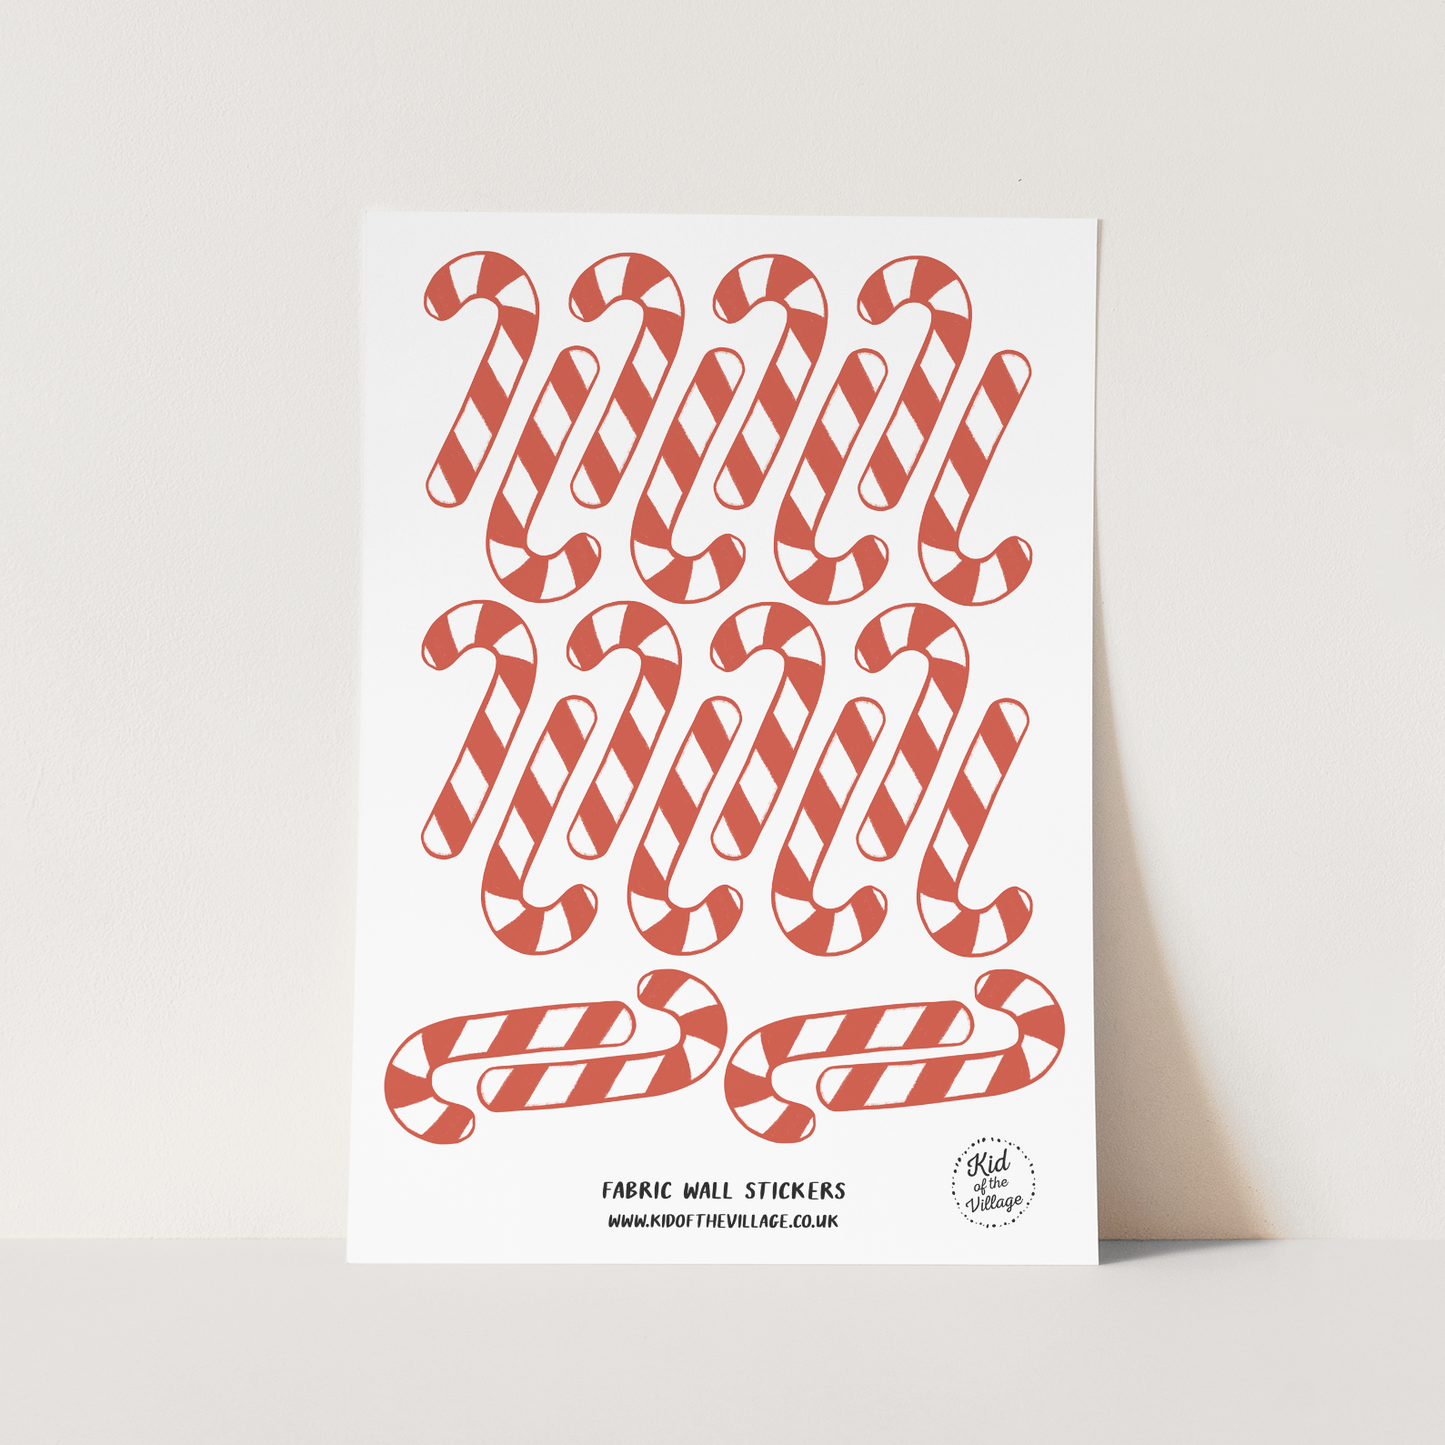 Candy Cane / Fabric Wall Stickers